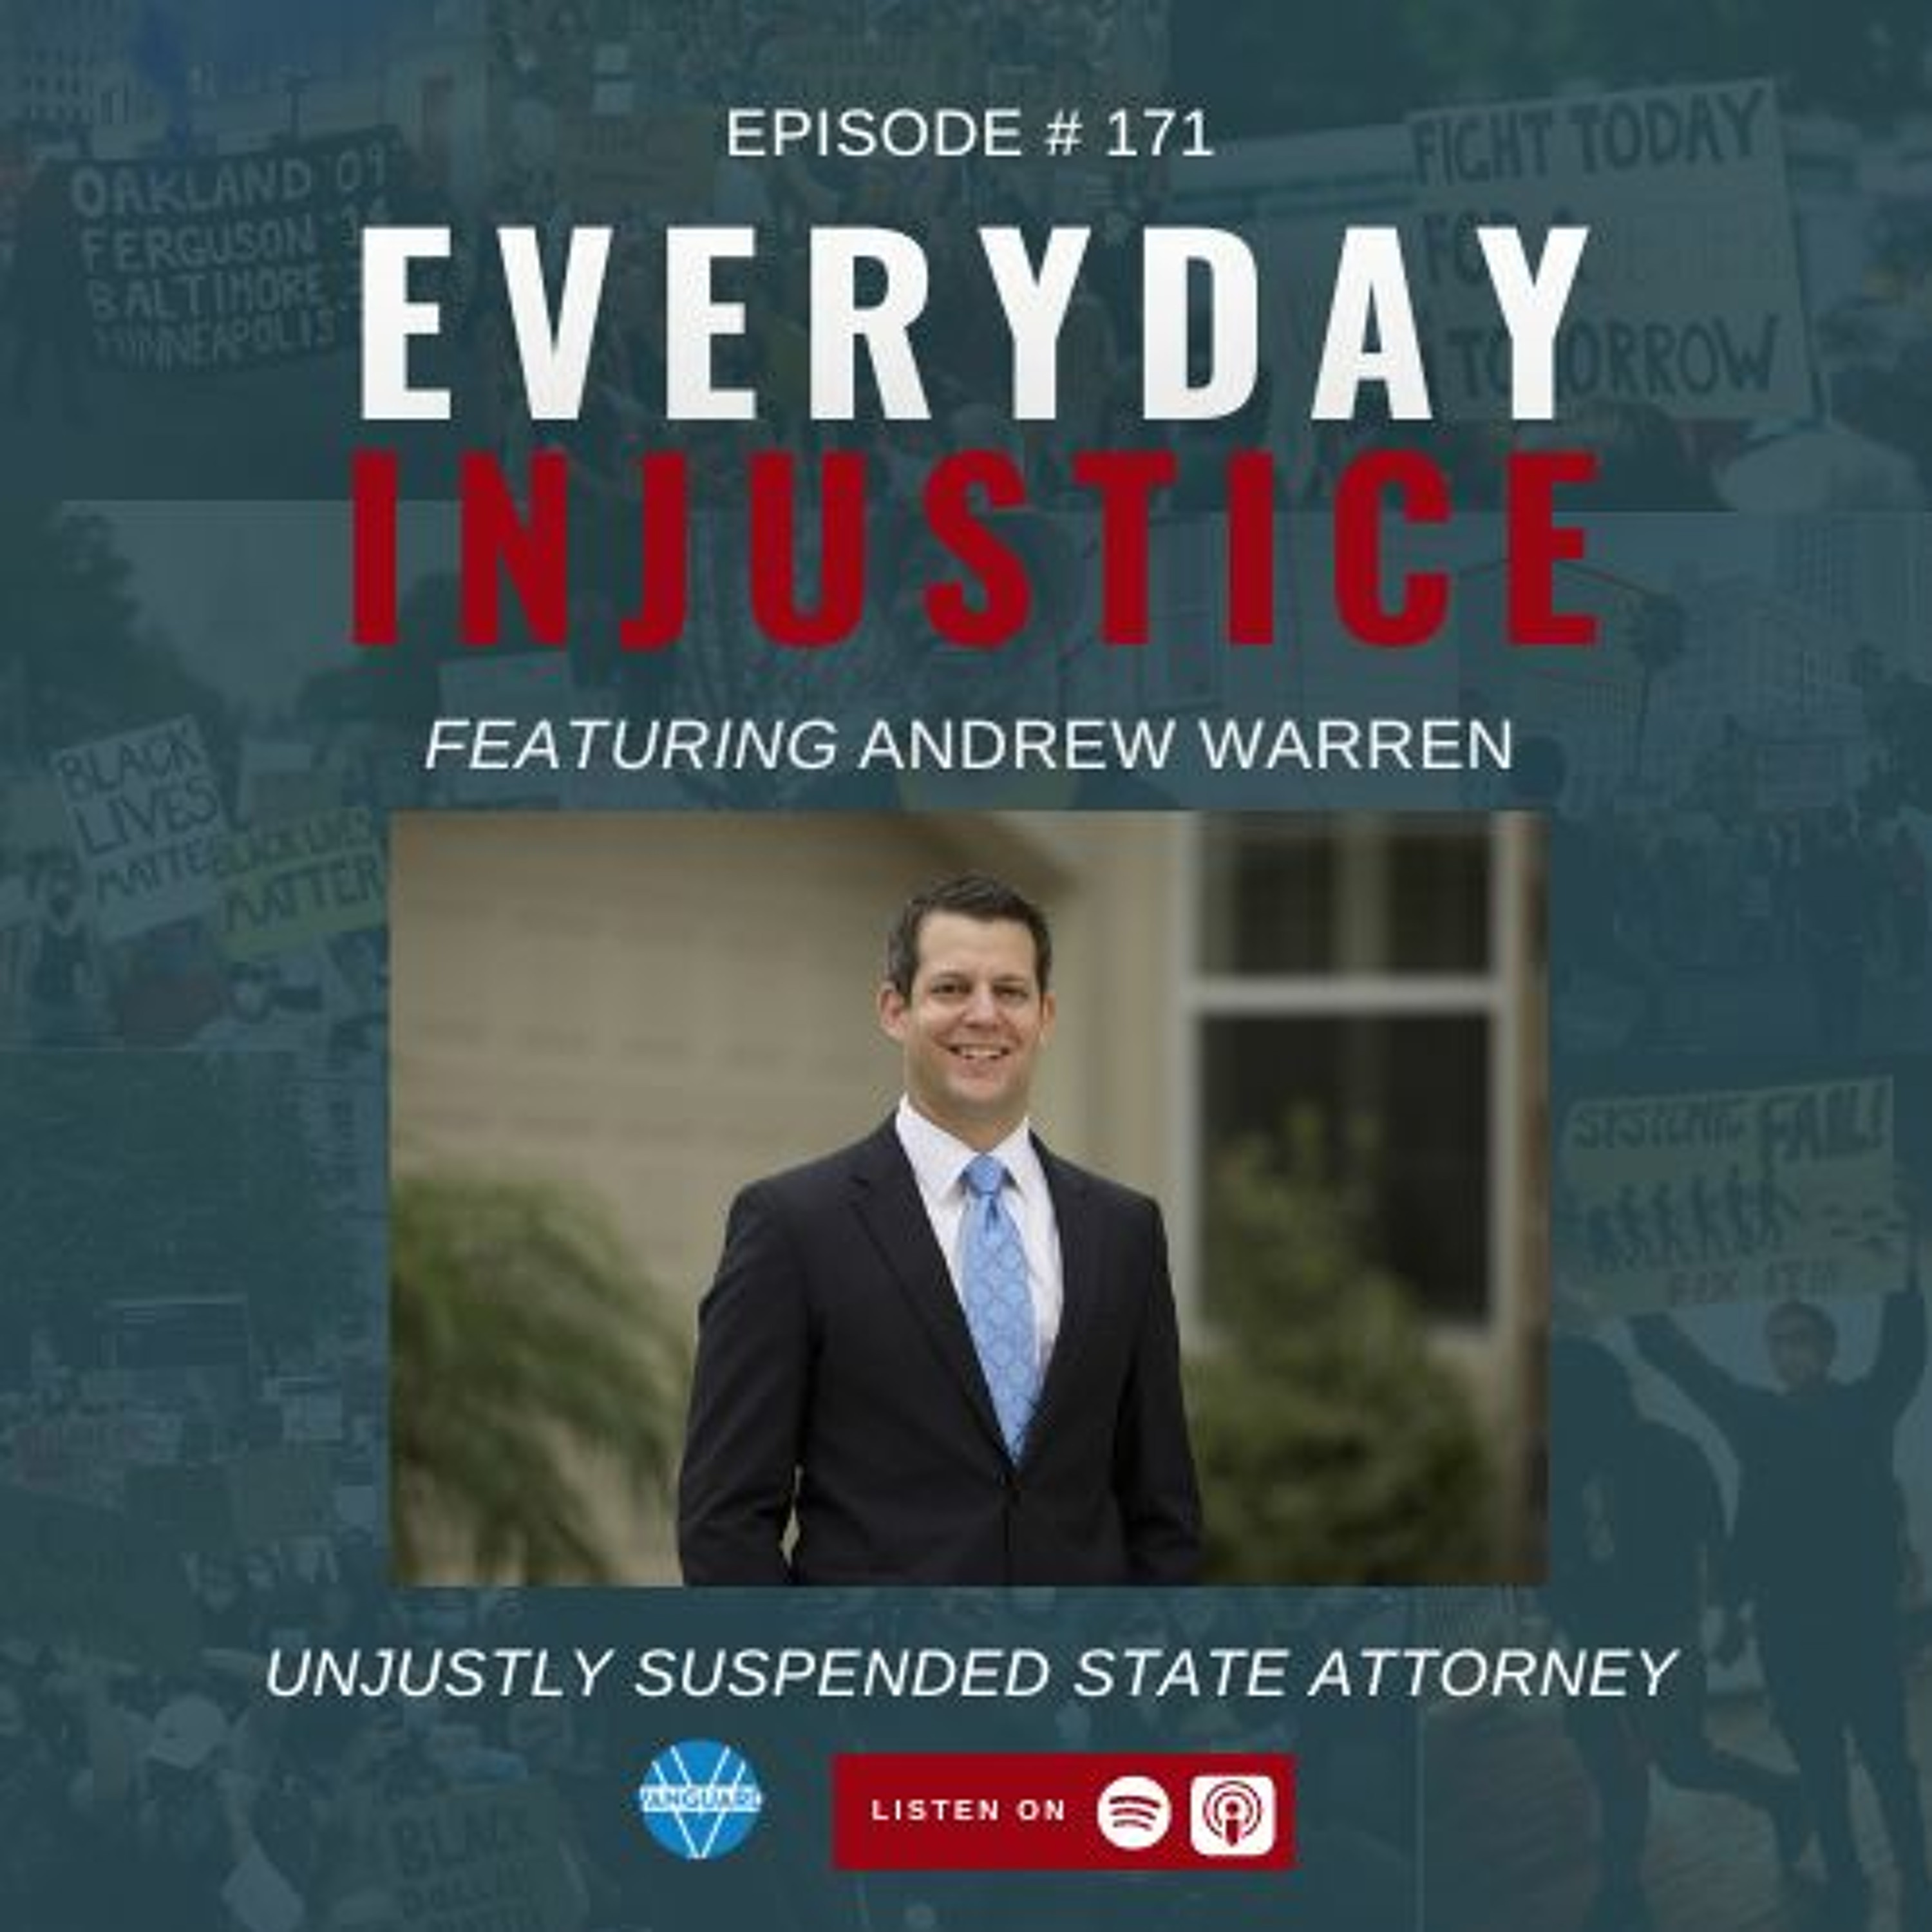 Everyday Injustice Podcast Episode 171: Andrew Warren Discusses Being Suspended by DeSantis